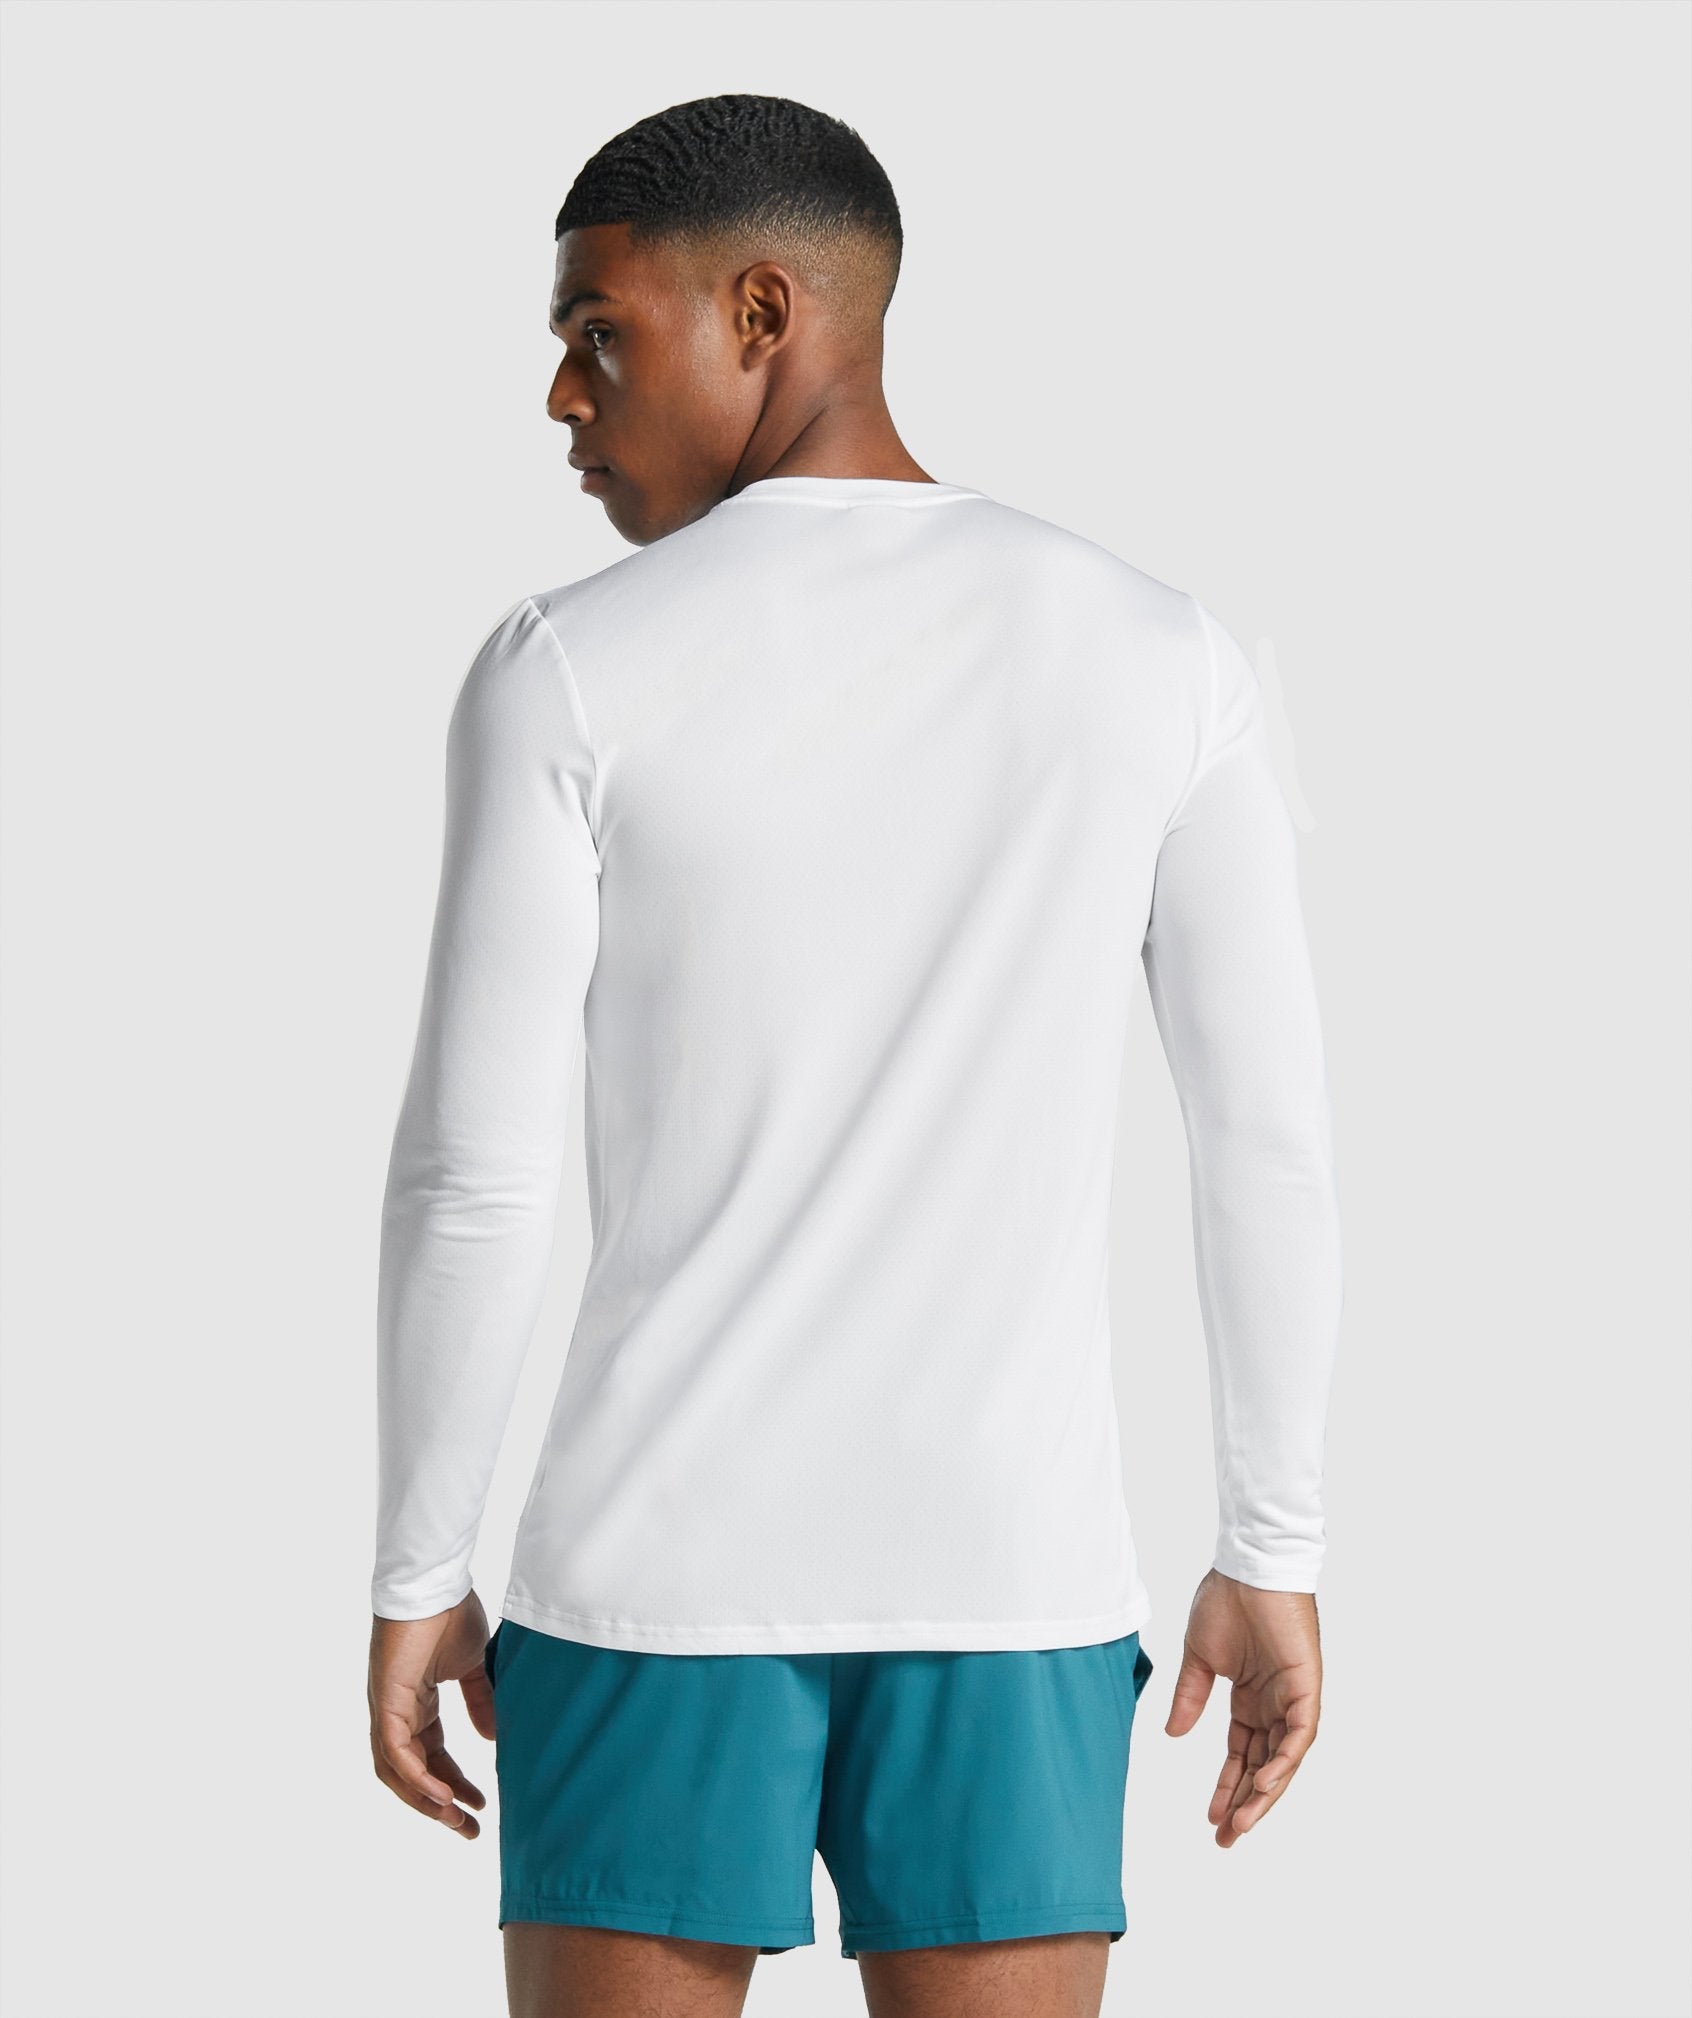 Arrival Long Sleeve Graphic T-Shirt in White - view 2